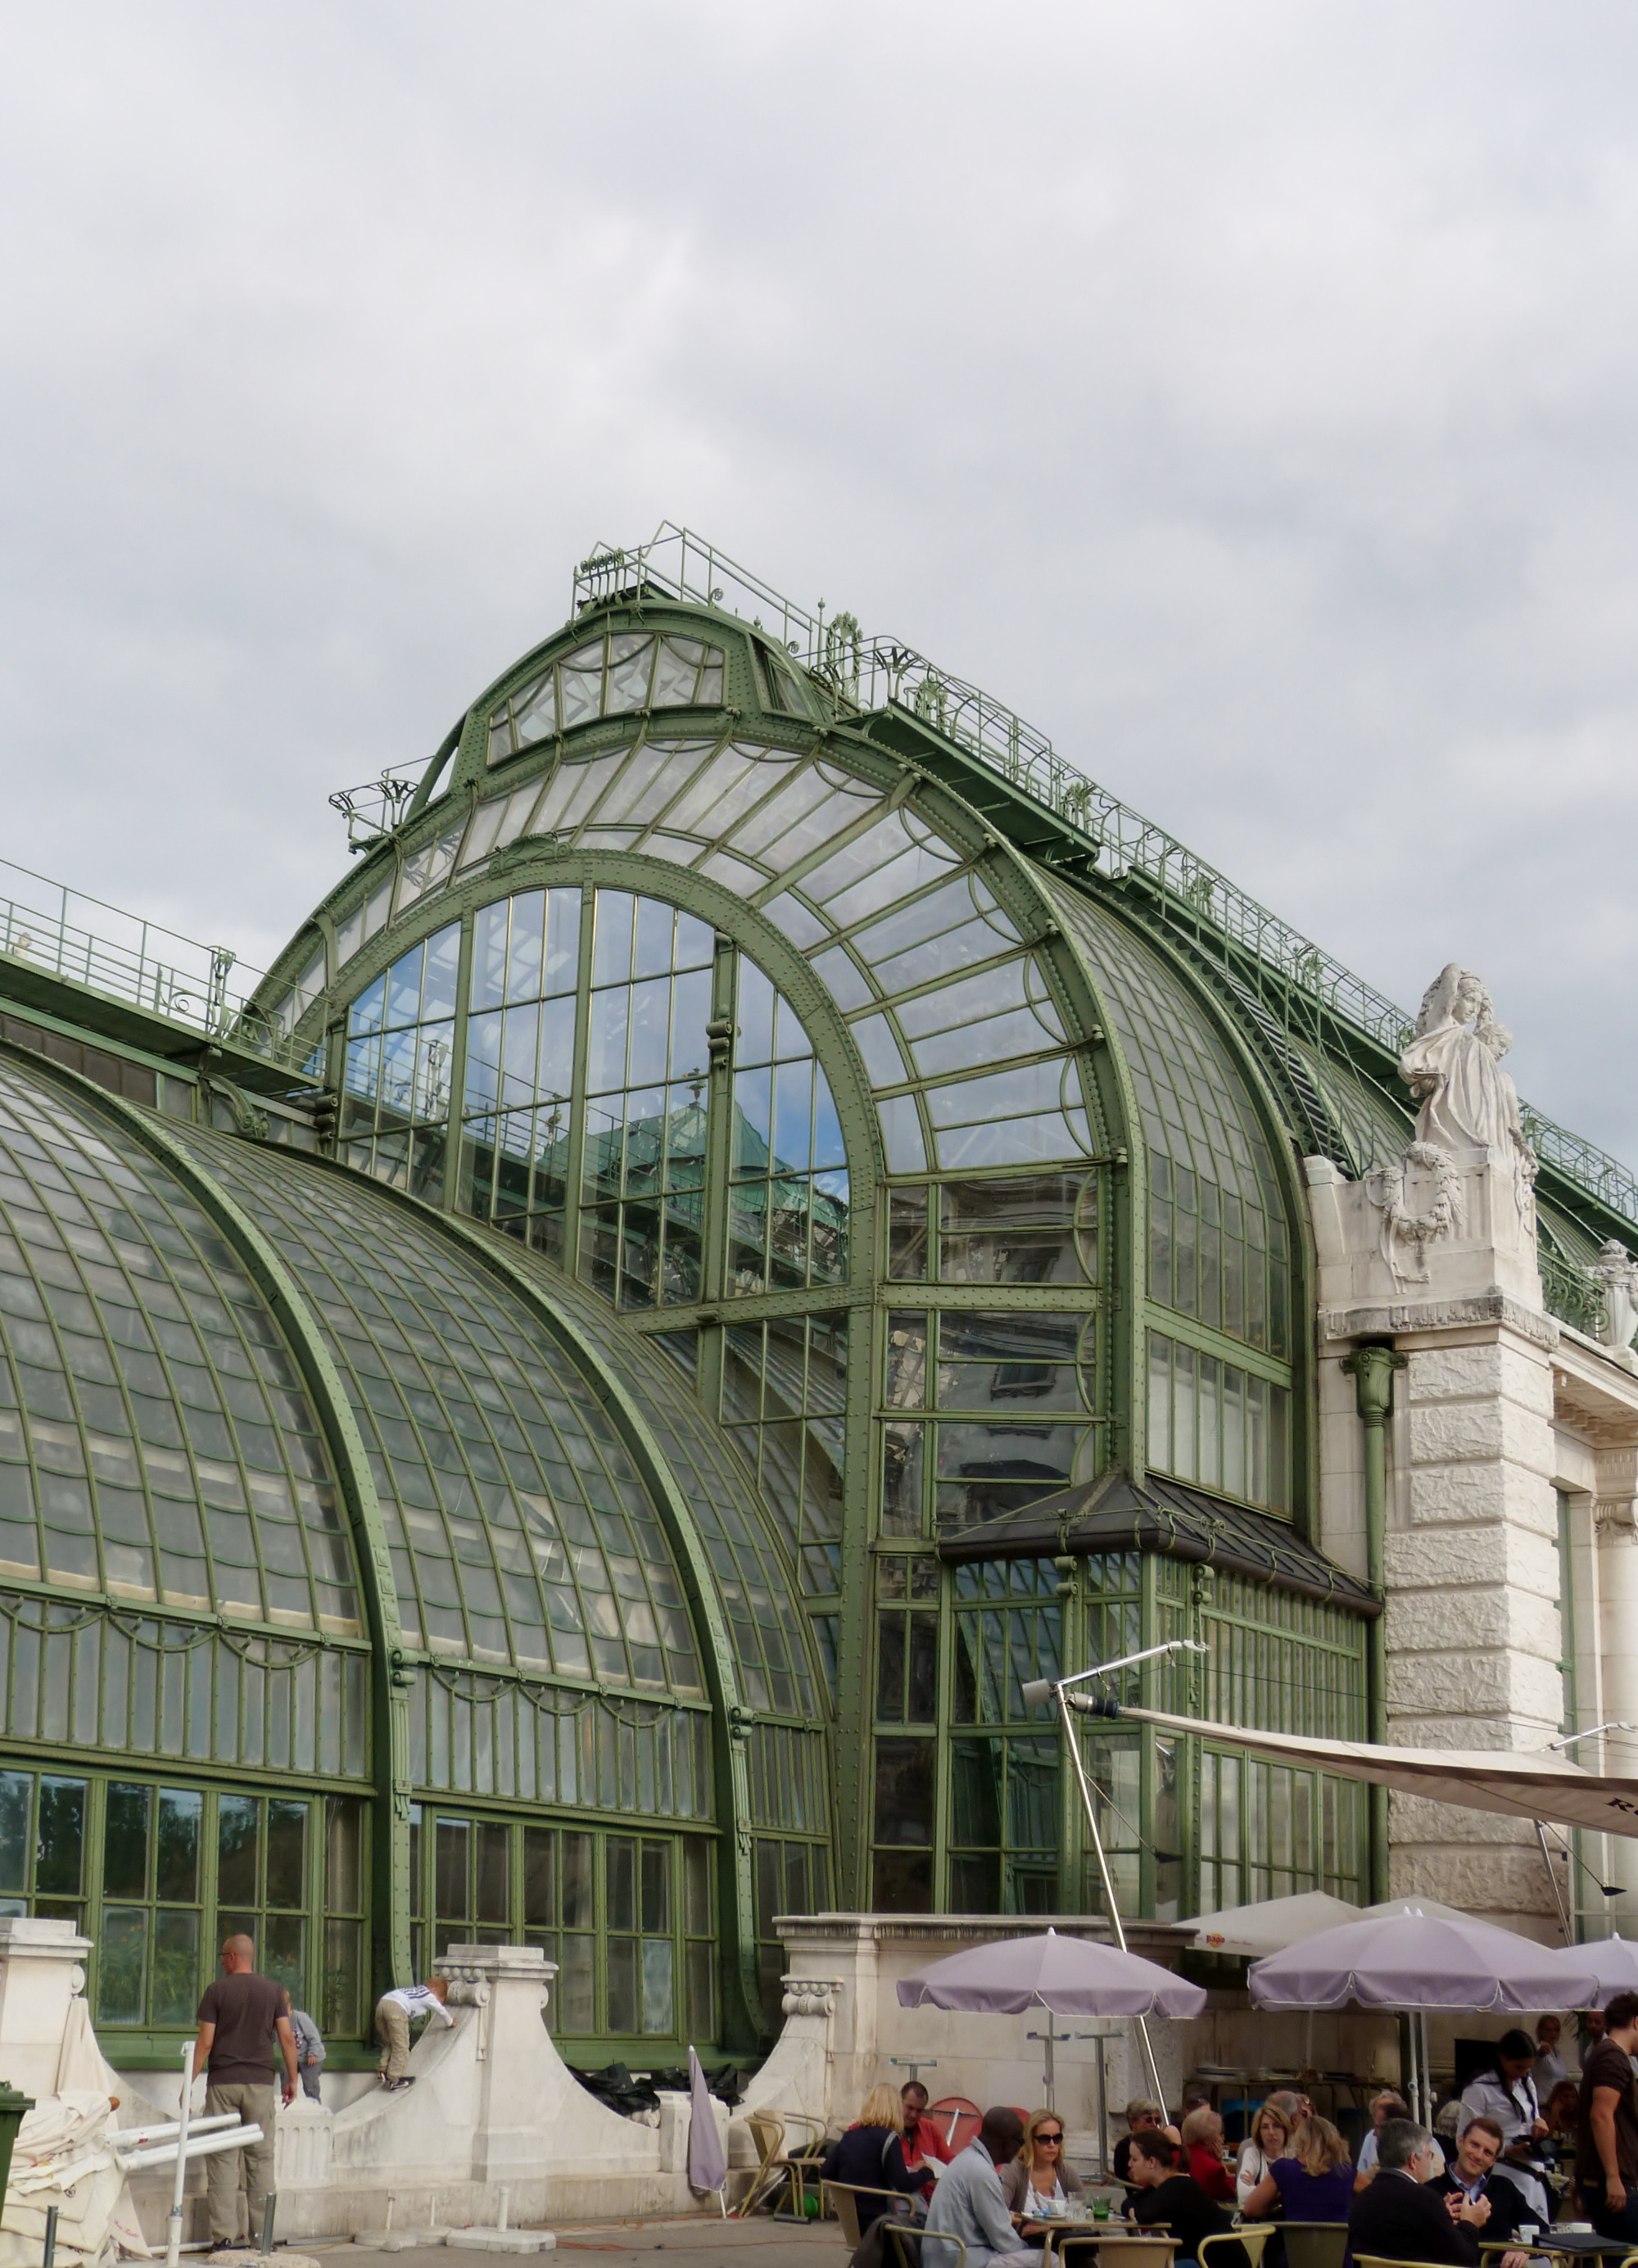 Schmetterlinghaus<br/>
Art nouveau palm house, home to hundreds of butterflies housed in a tropical rainforest setting.